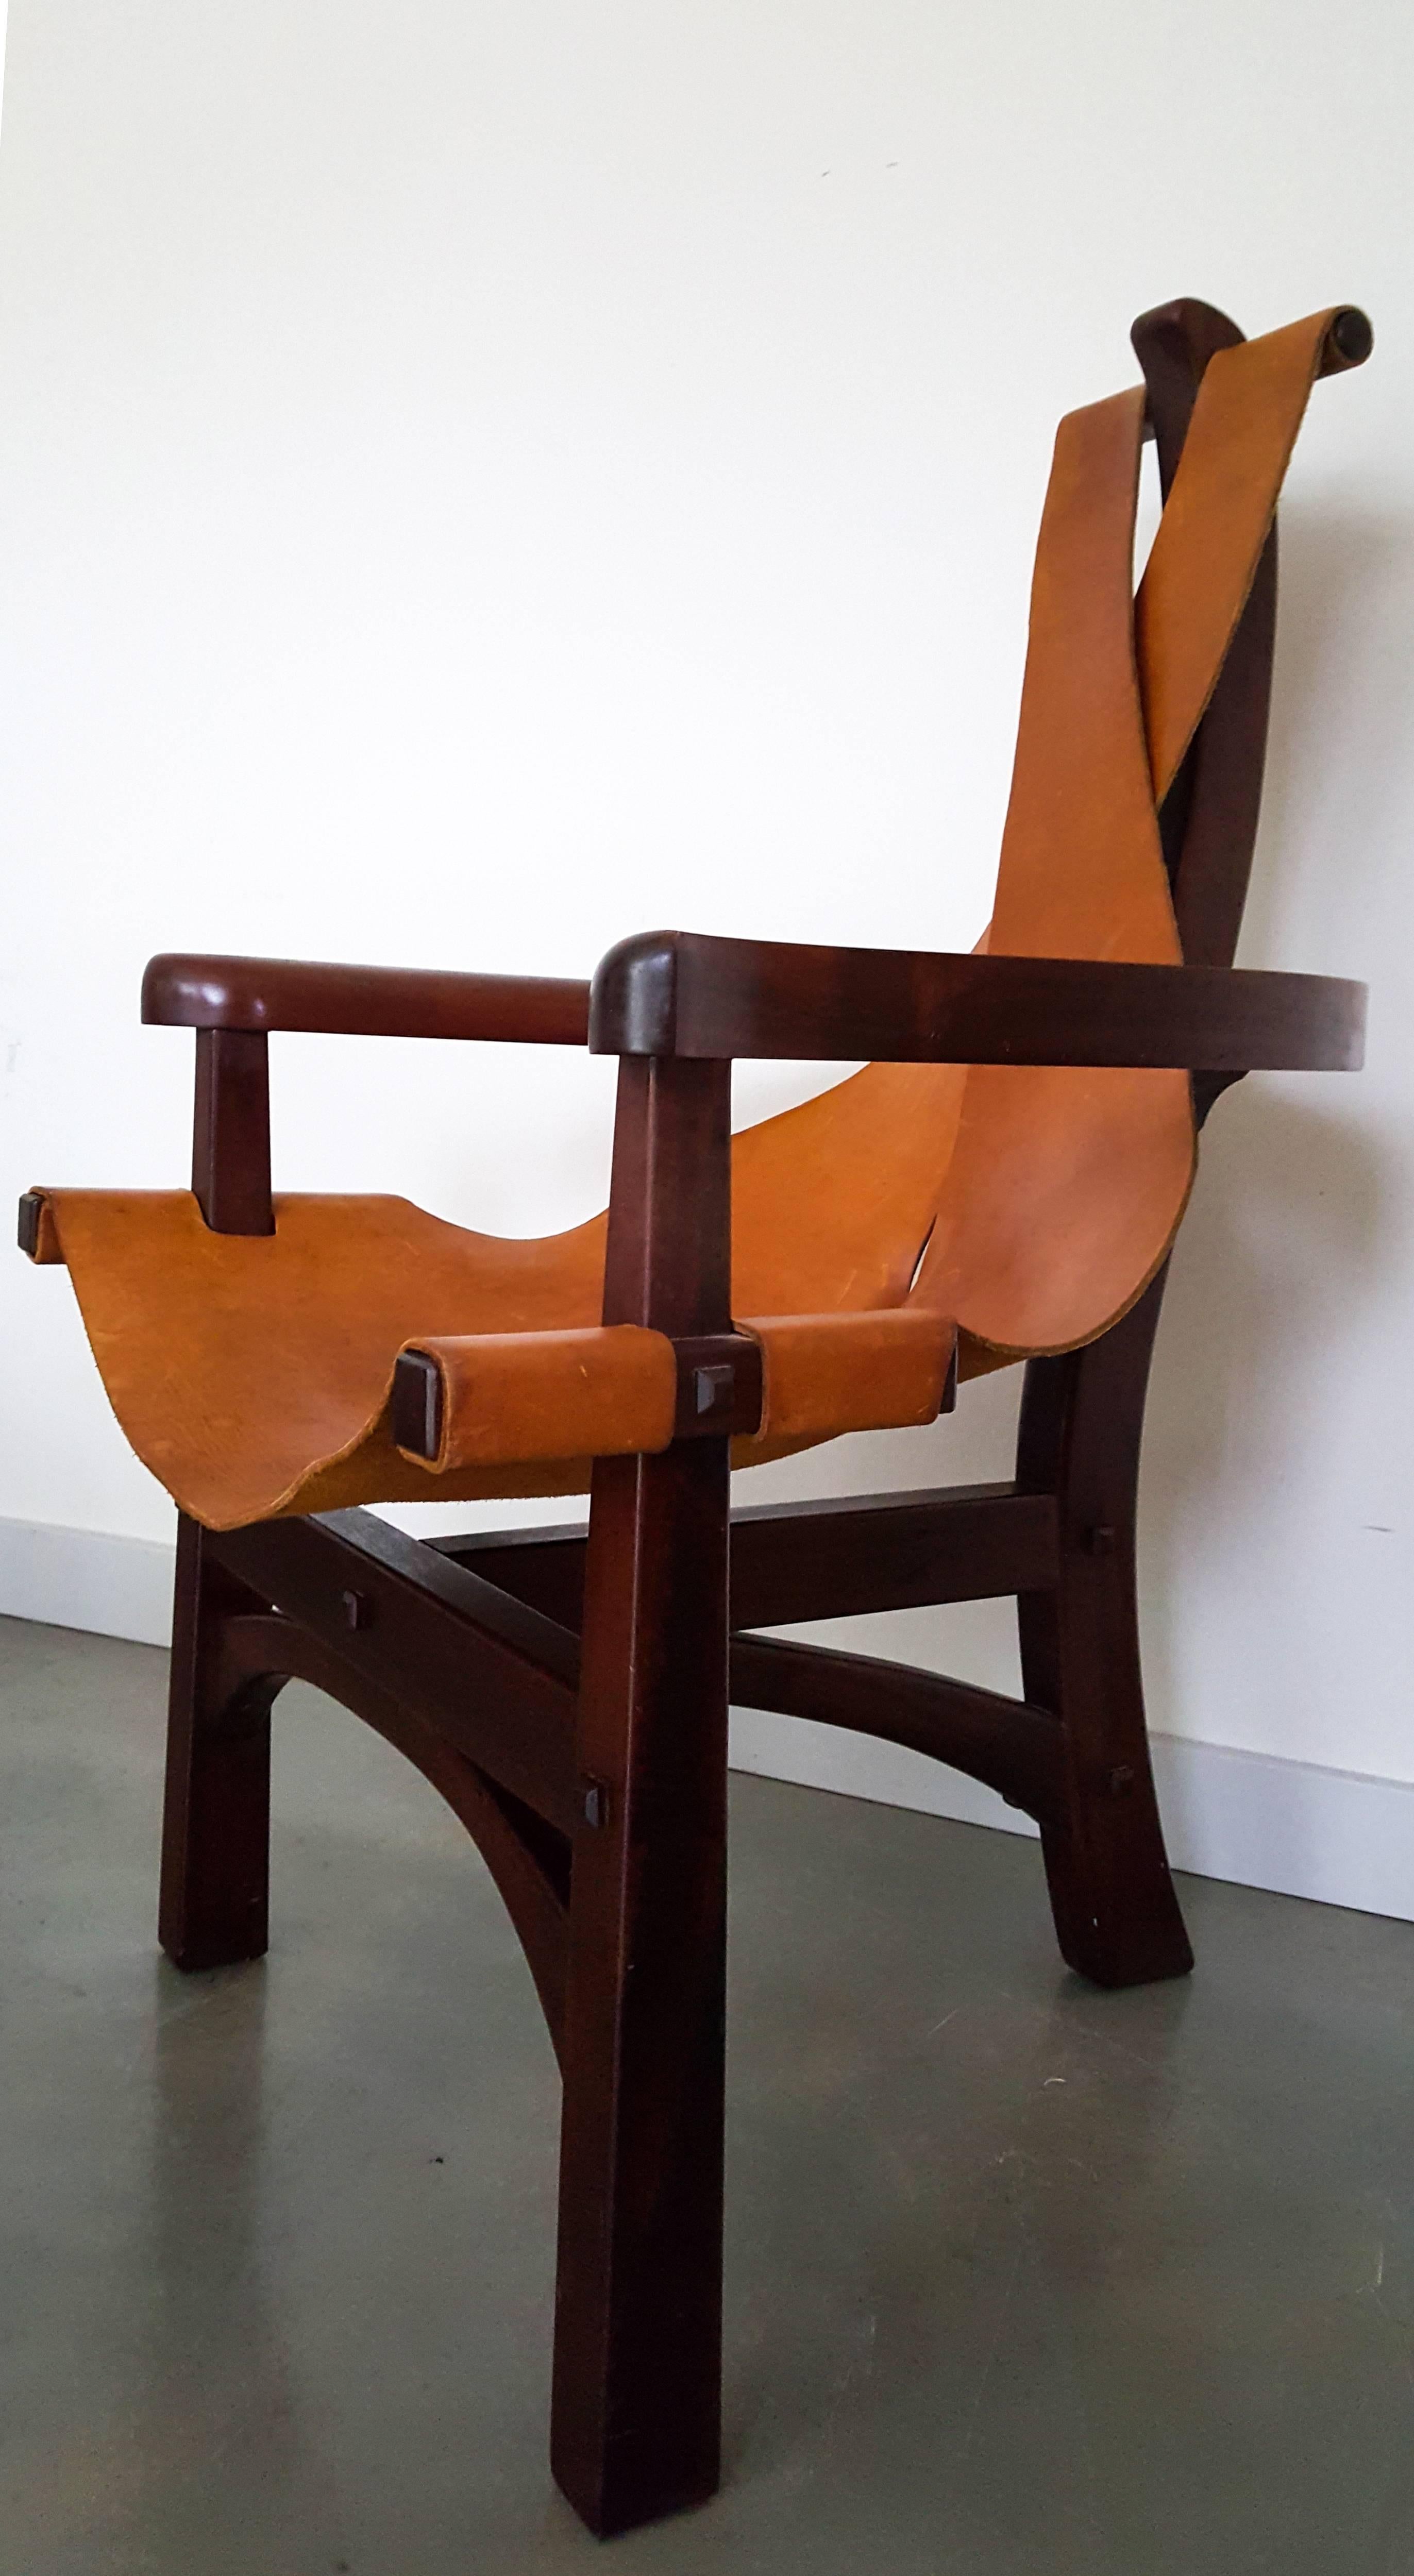 American Pair of Three-Legged Arts and Crafts Slung Leather Lounge Chairs